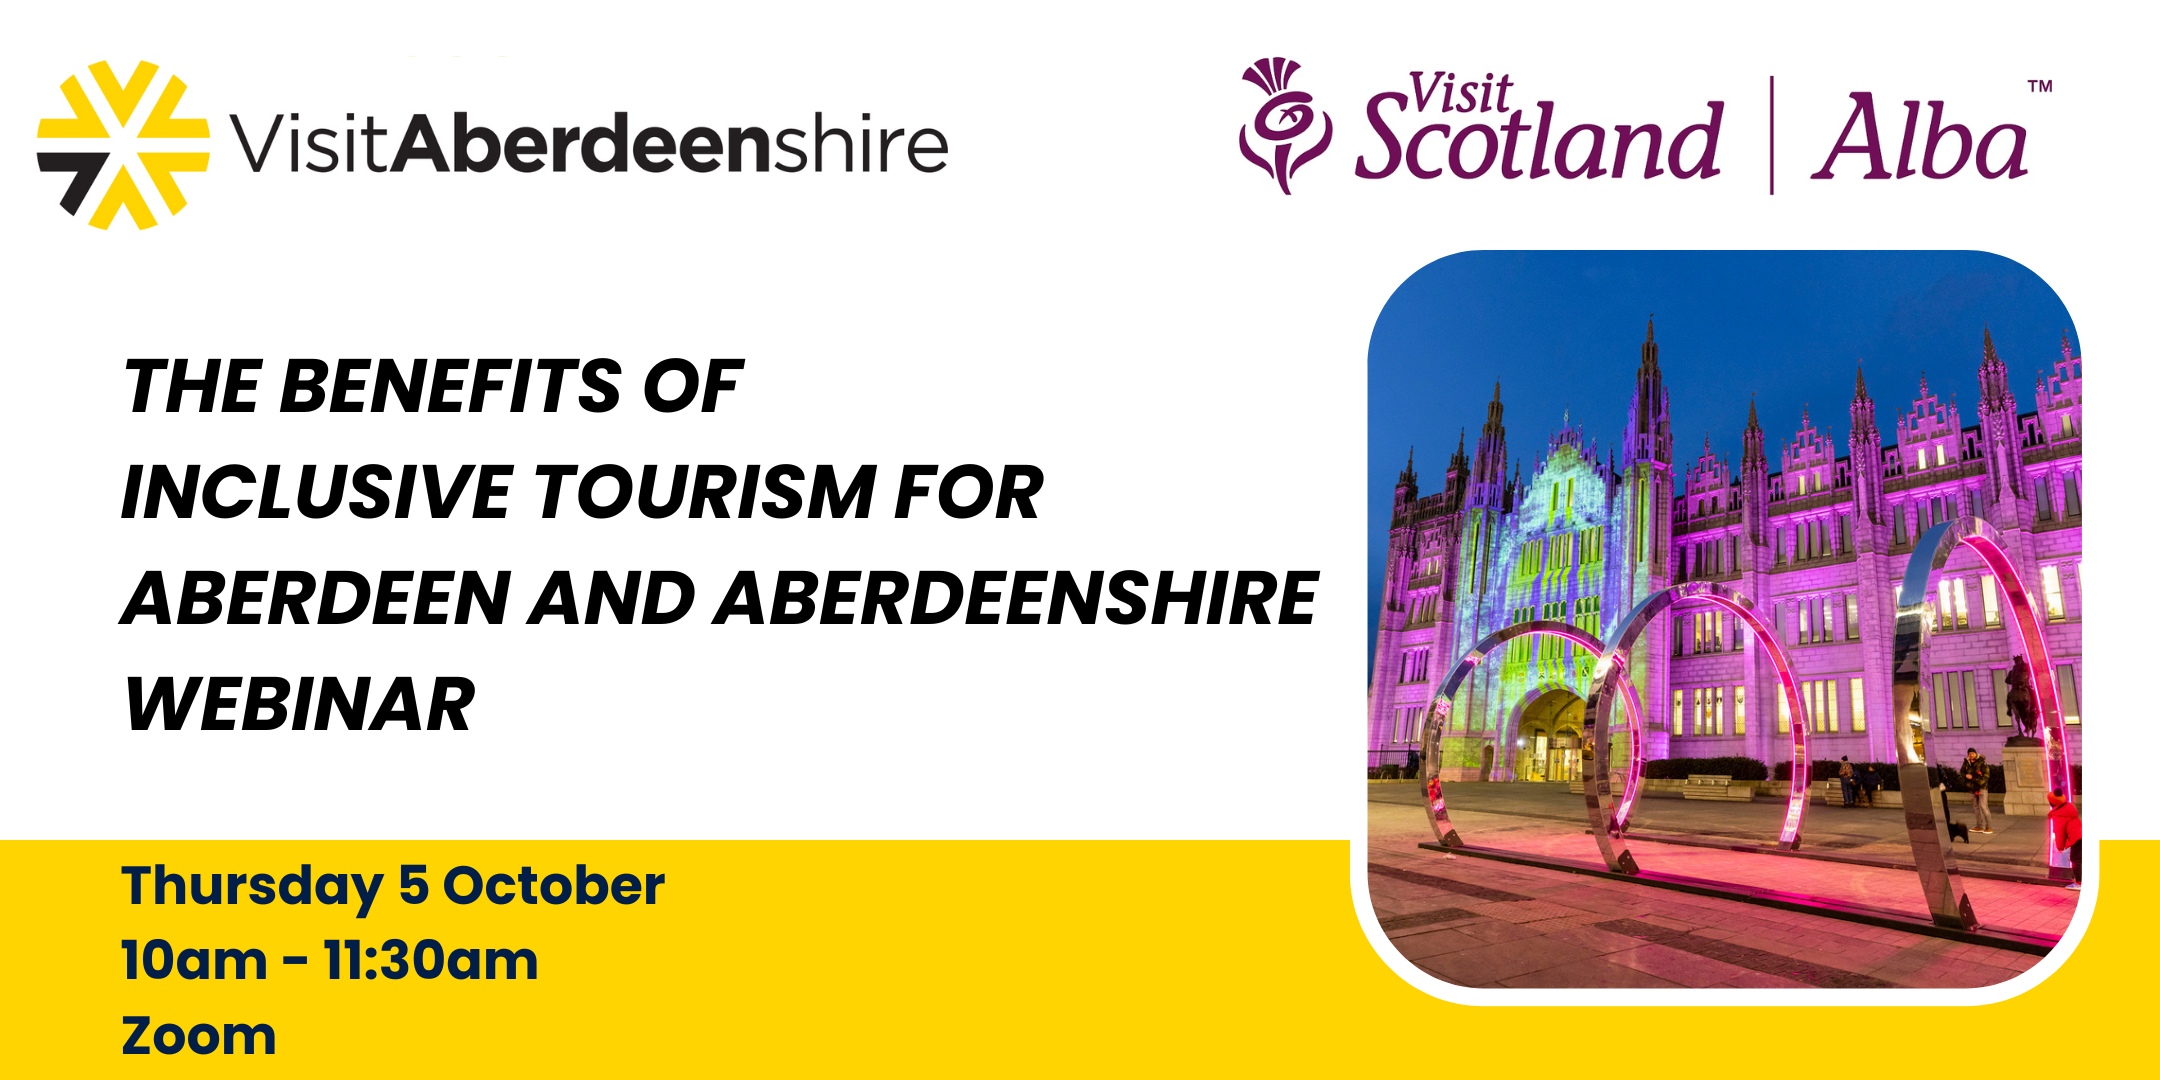 Webinar: The Benefits of Inclusive Tourism for Aberdeen and Aberdeenshire  